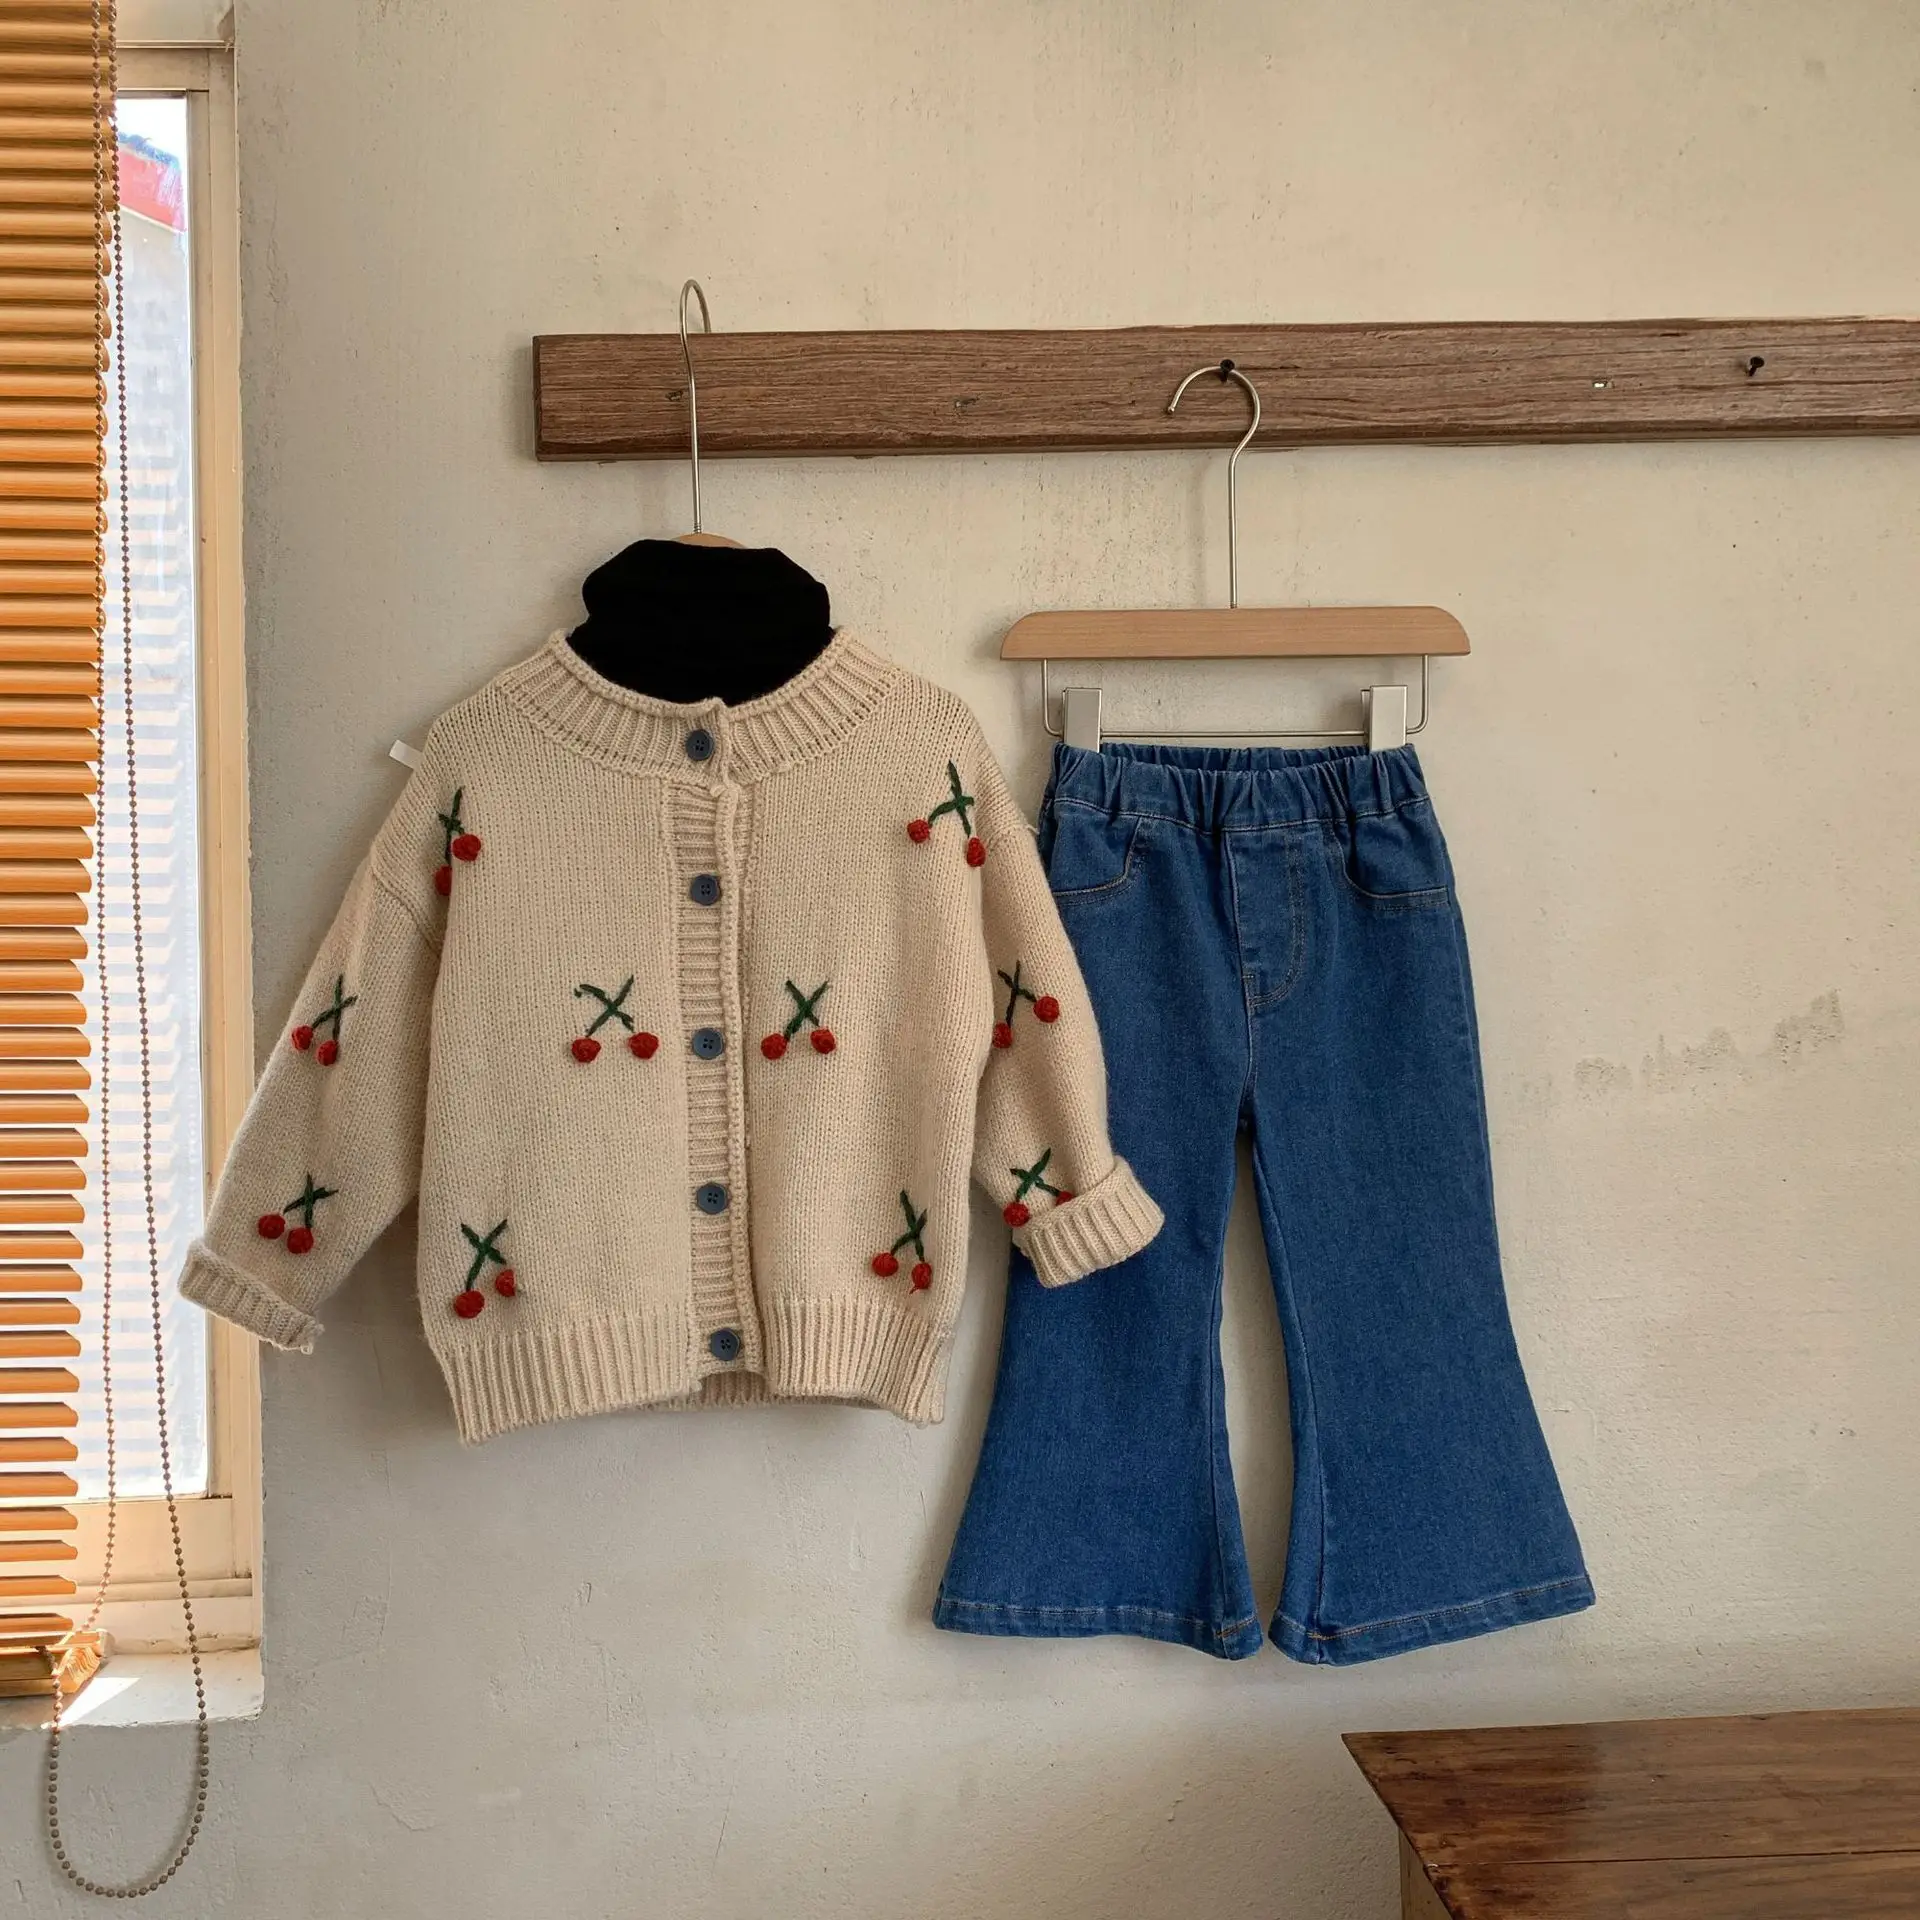 

2022 Autumn And Winter New Children' Clothing Korean Version Of Handmade Cherry Jacket Long-sleeved Girls Knitted Cardigan 2-8T